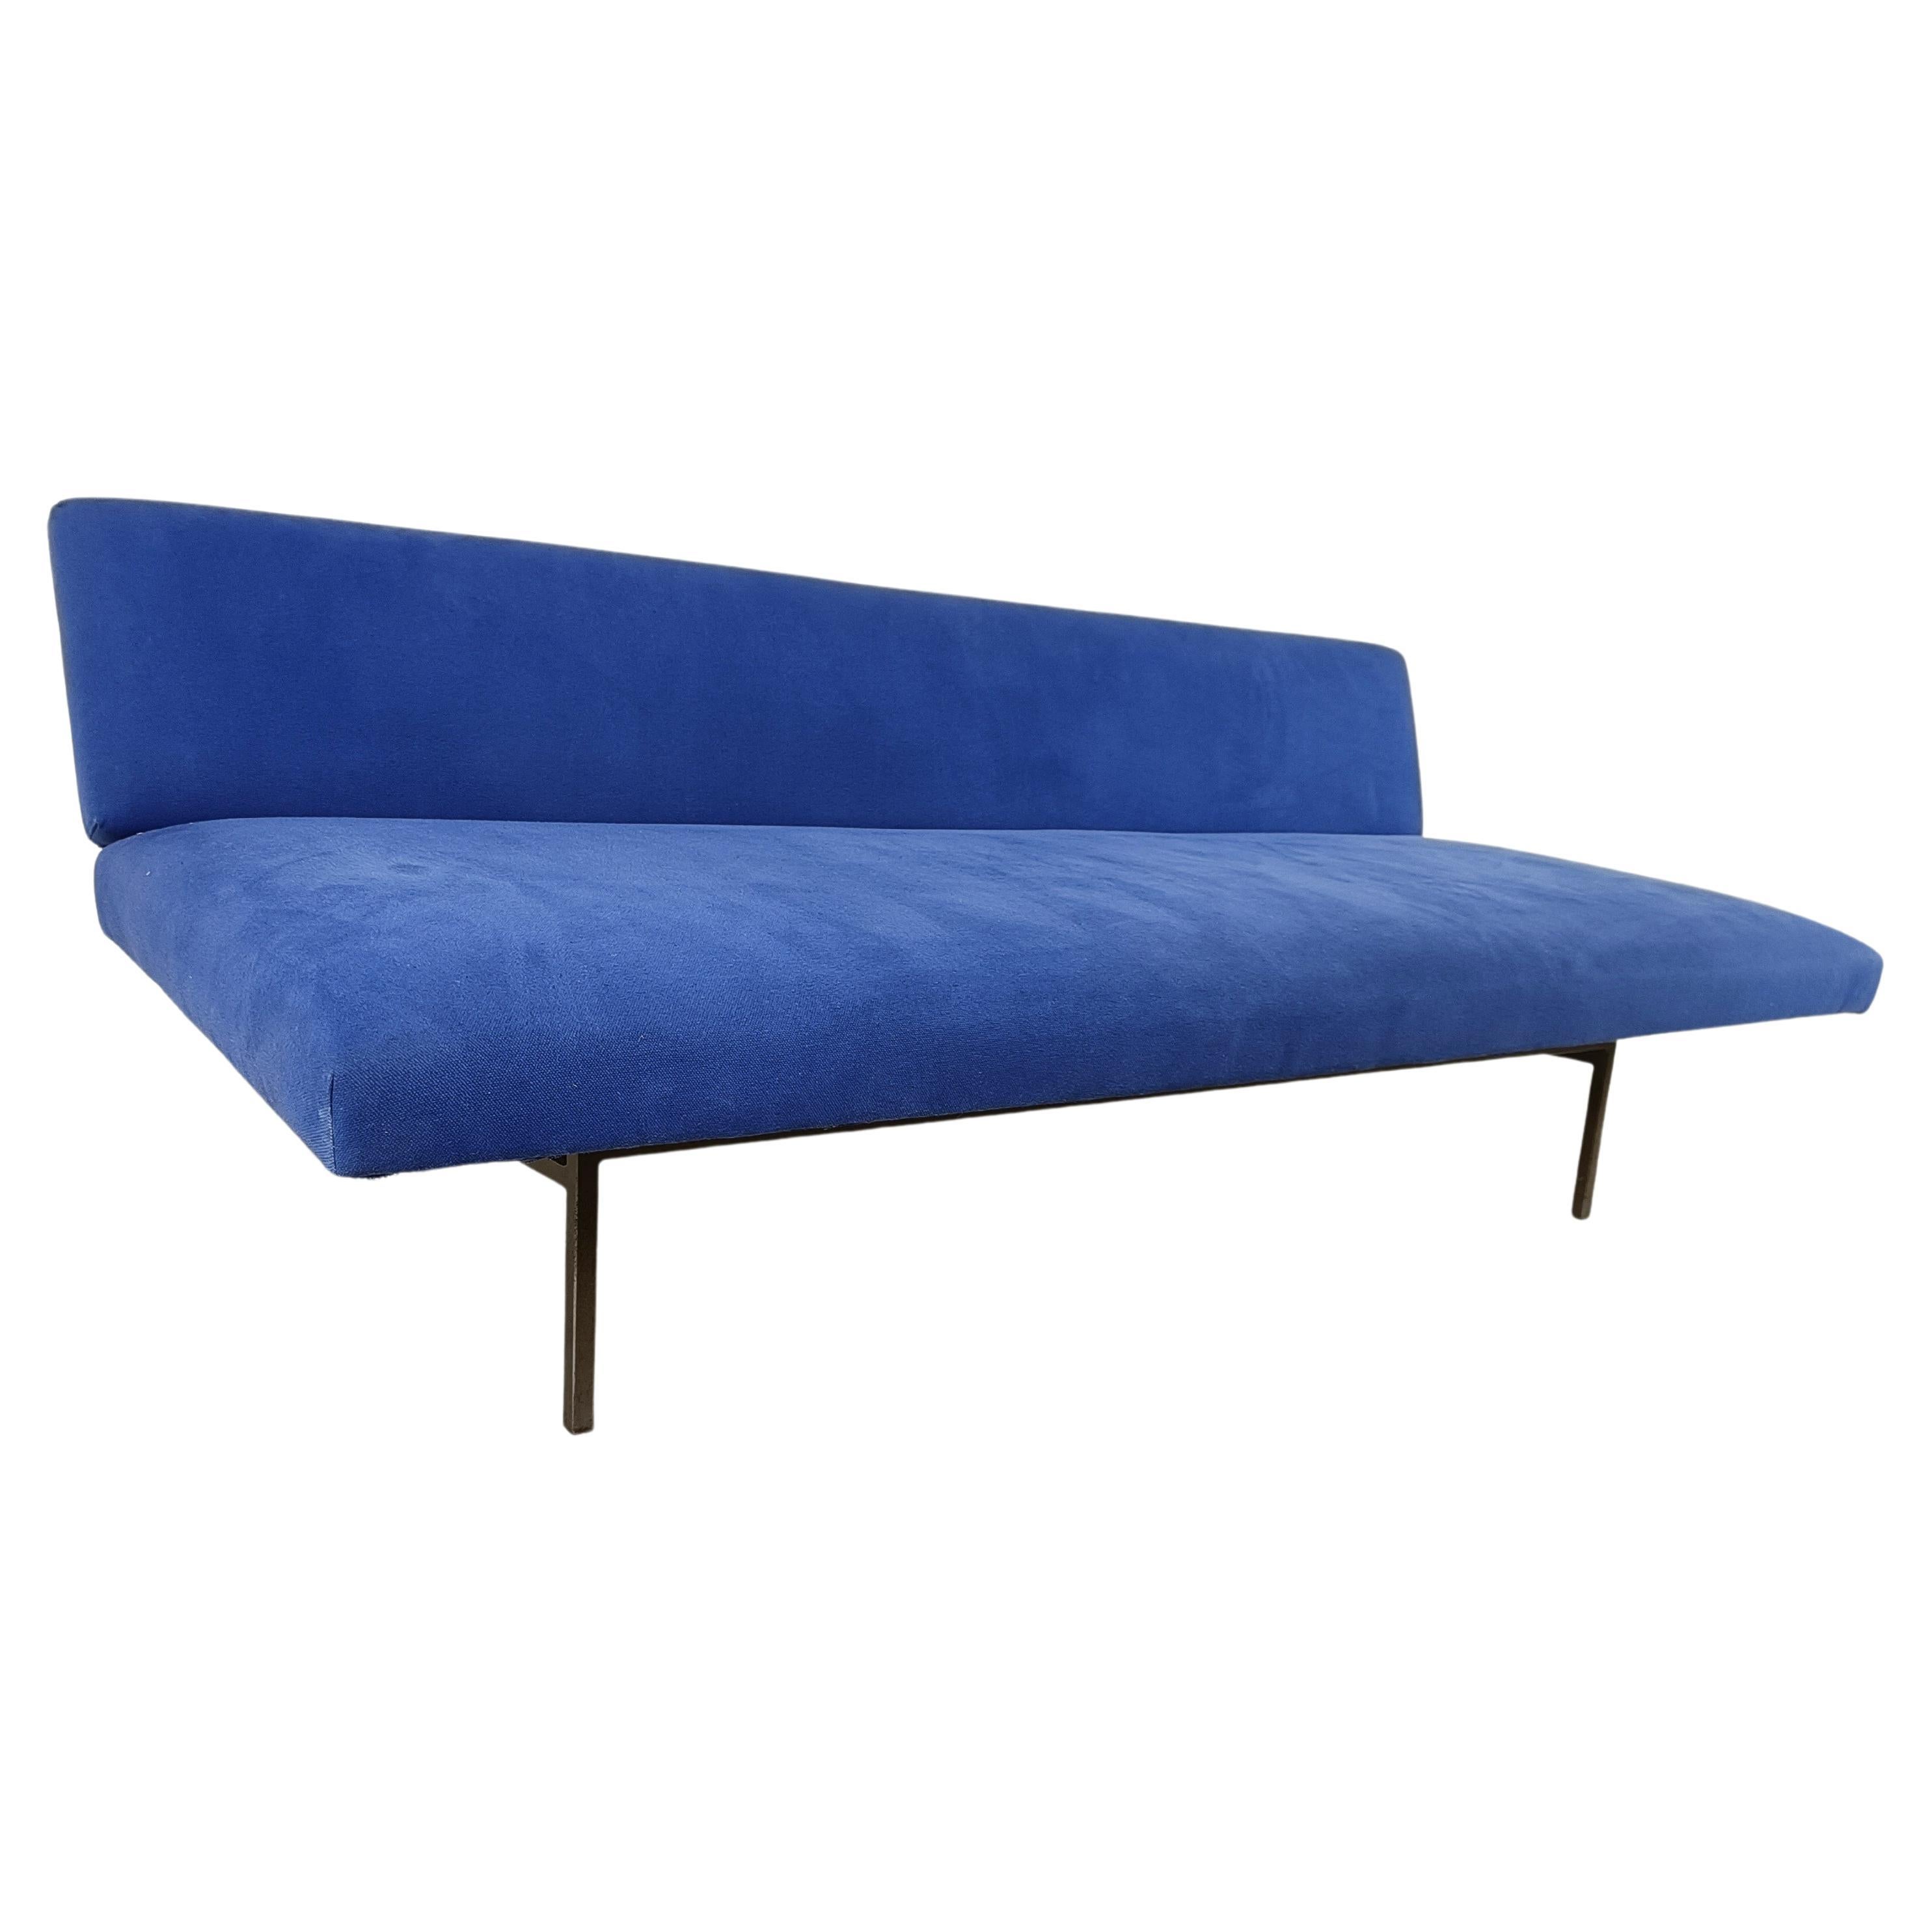 Modernist daybed by Rob Parry, 1960s For Sale